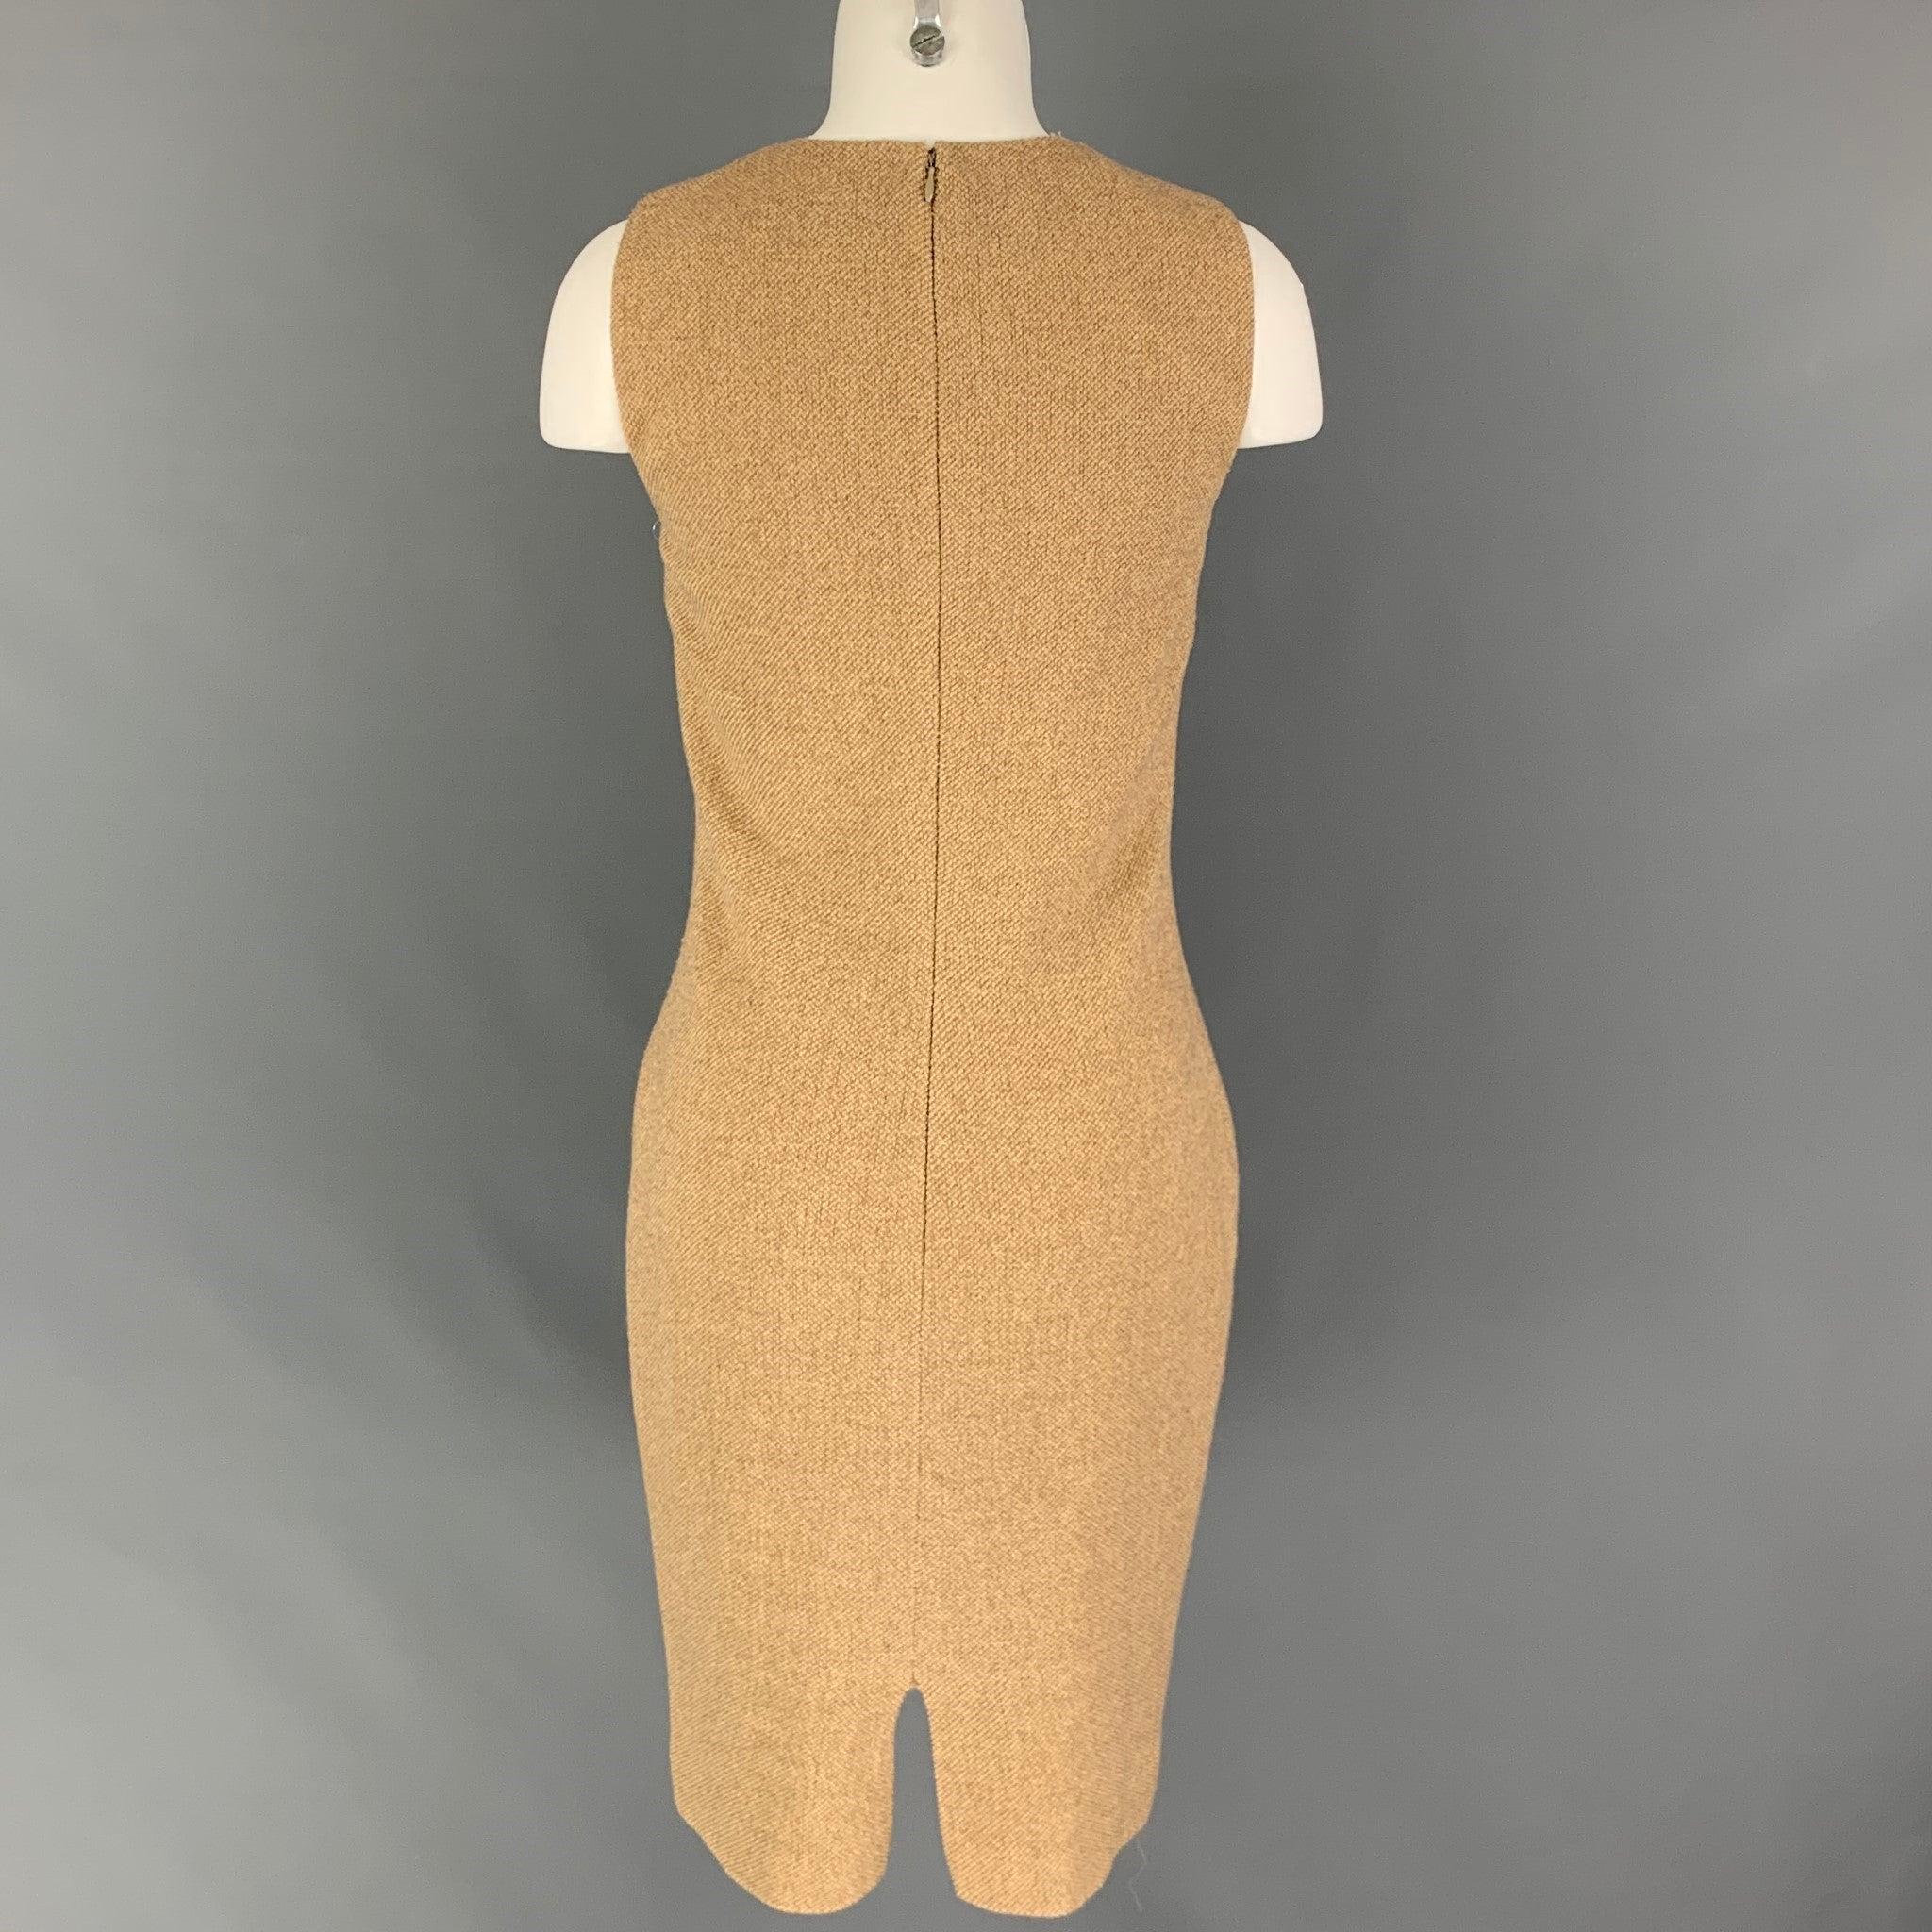 RALPH LAUREN Black Label Size 6 Beige Wool Blend Woven Sleeveless Dress In Good Condition For Sale In San Francisco, CA